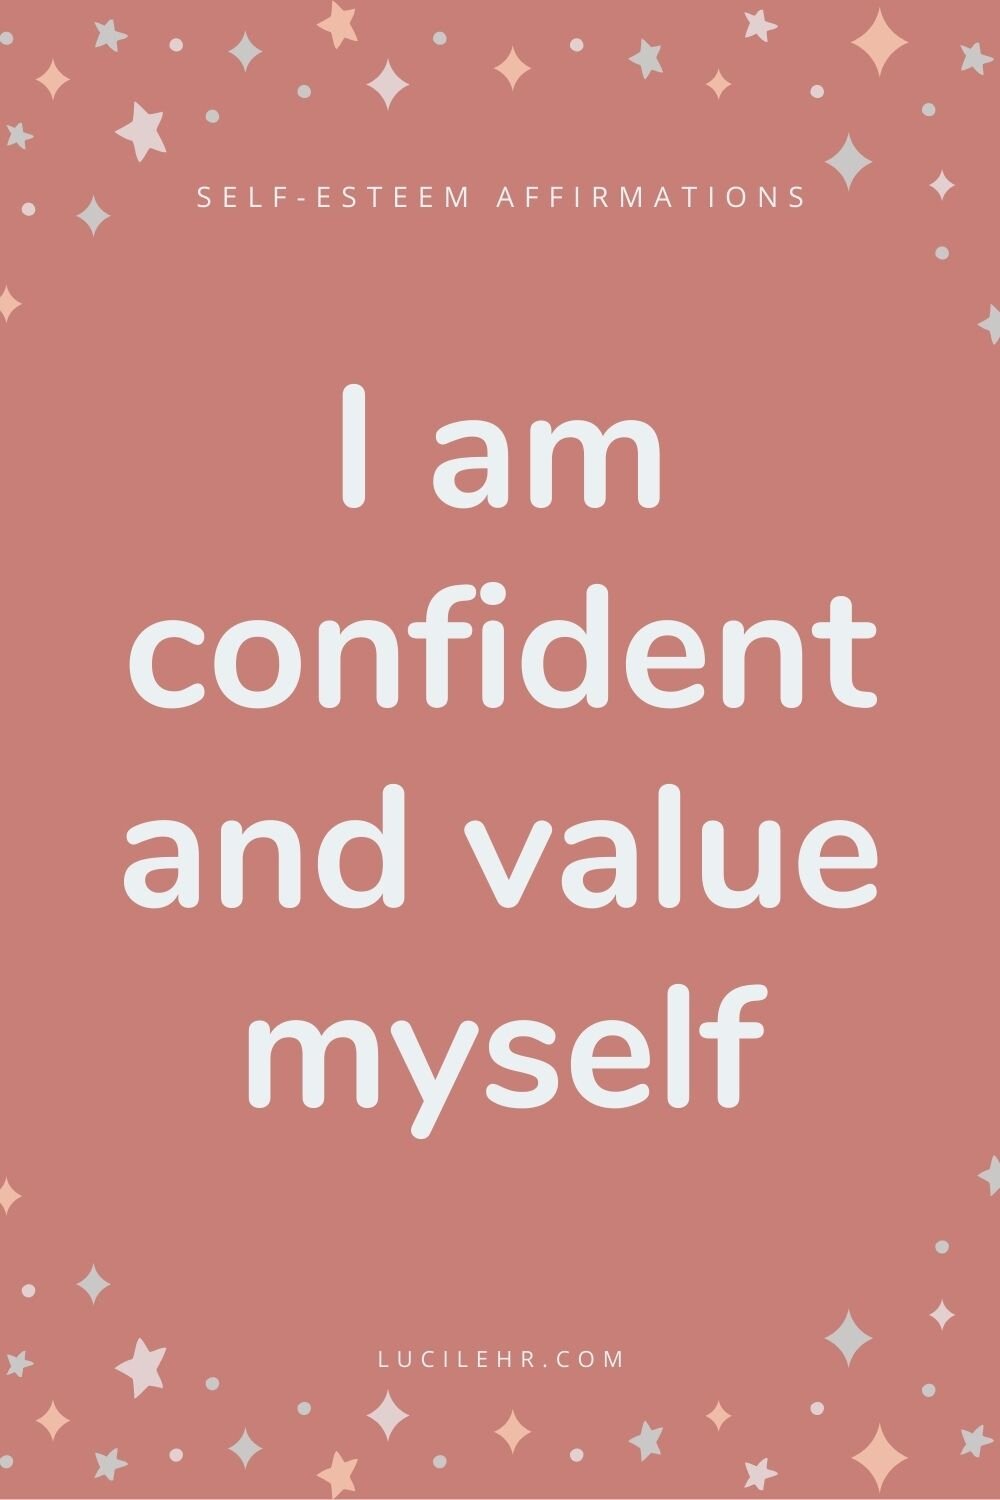 Positive Affirmations For Confidence And Self Esteem Lucilehr